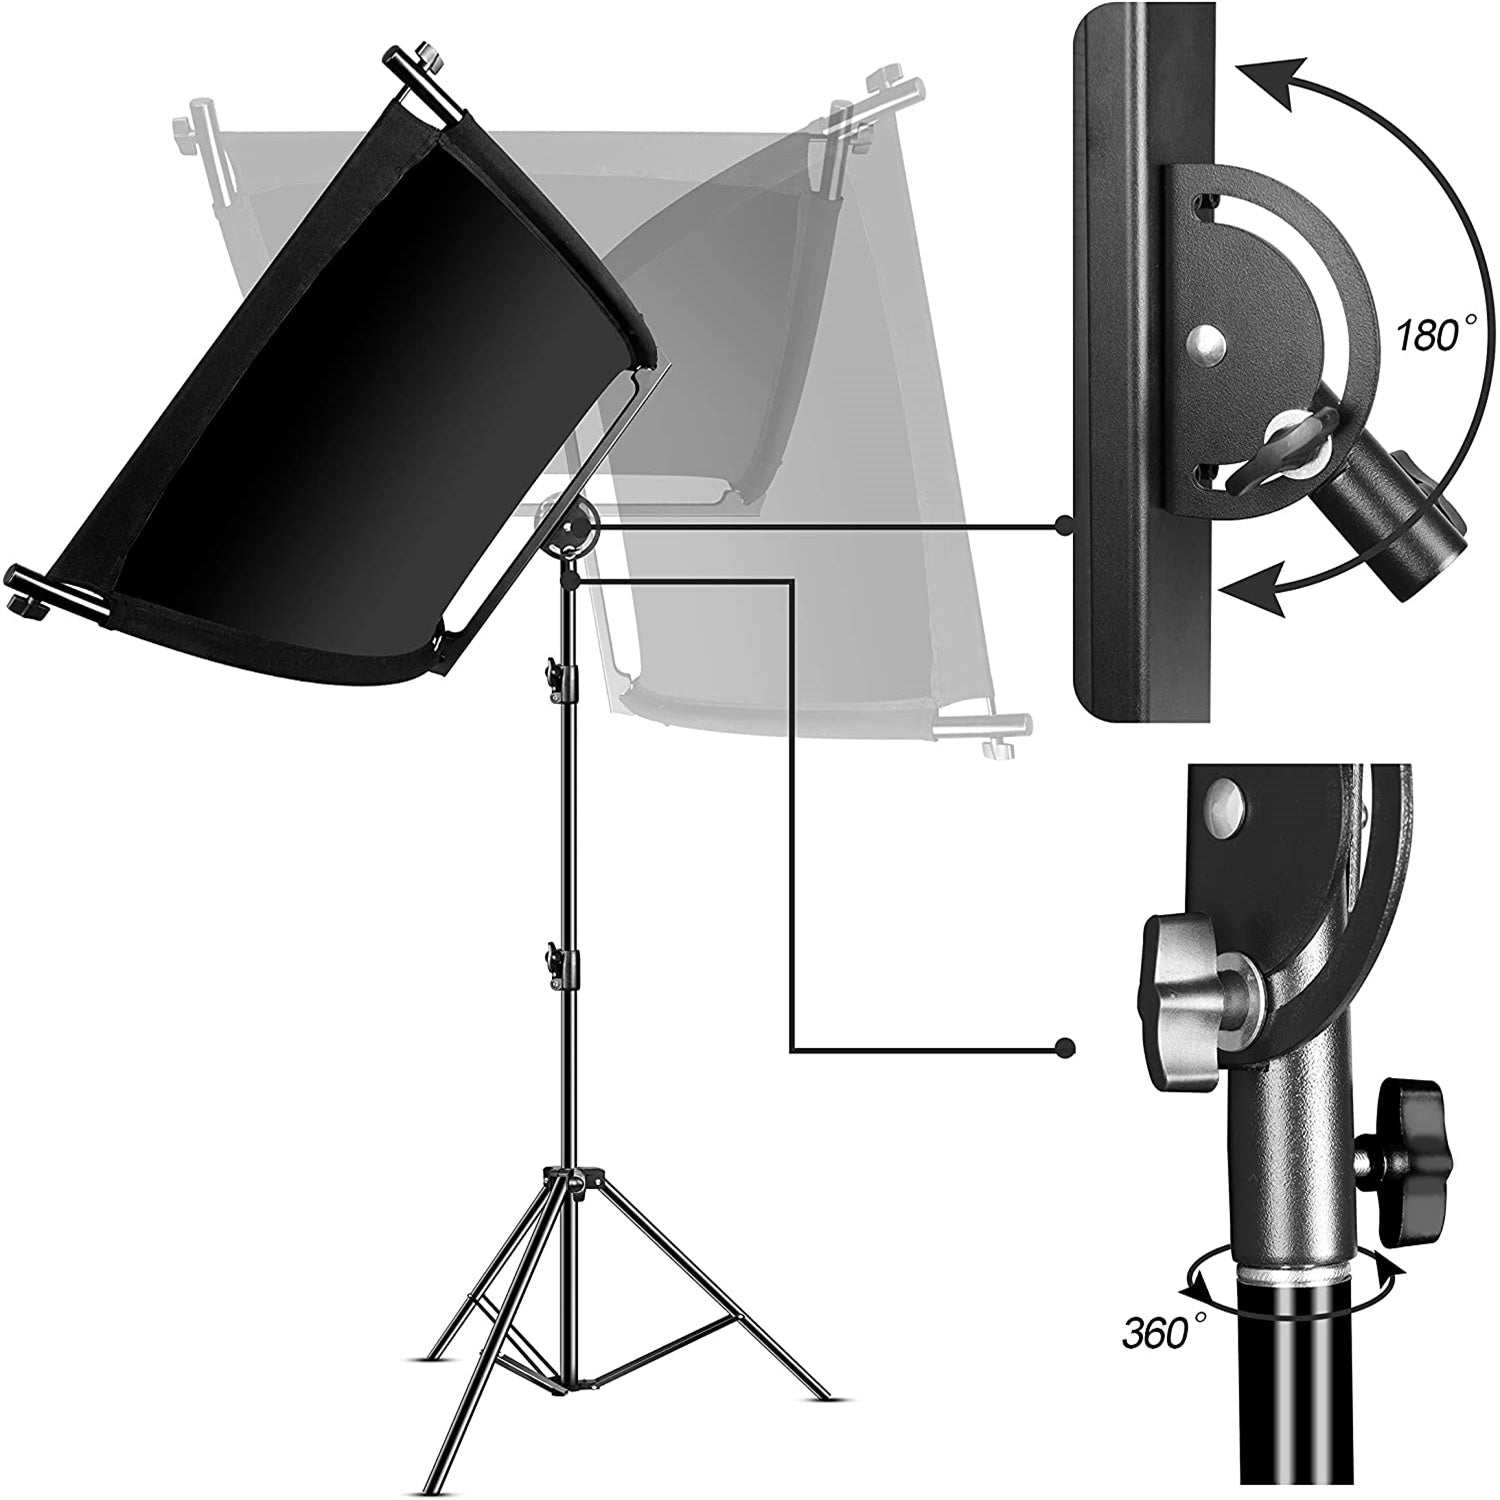 EMART Photography Arclight Curved Eyelighter Light Reflector, Photo Studio Clamshell Lighting Diffuser with Carrying Bag - EMART INTERNATIONAL, INC (Official Website)